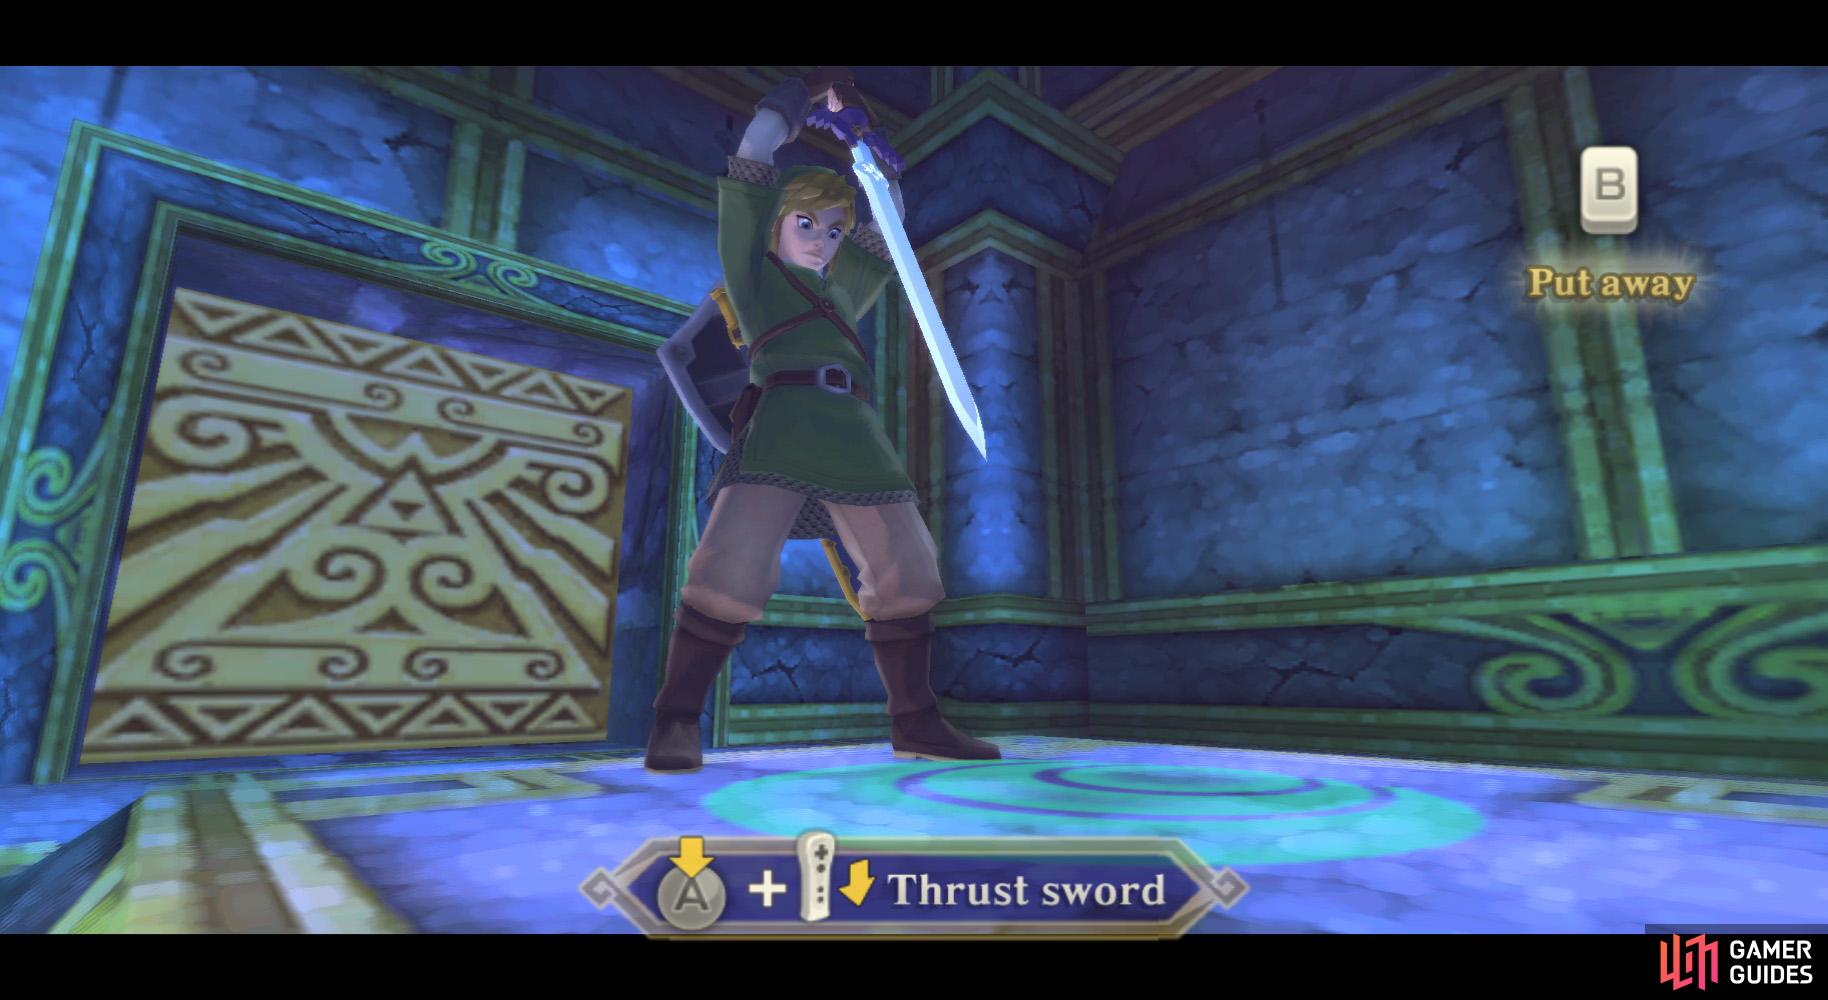 Thrust your sword into the mark of Farore on the ground.